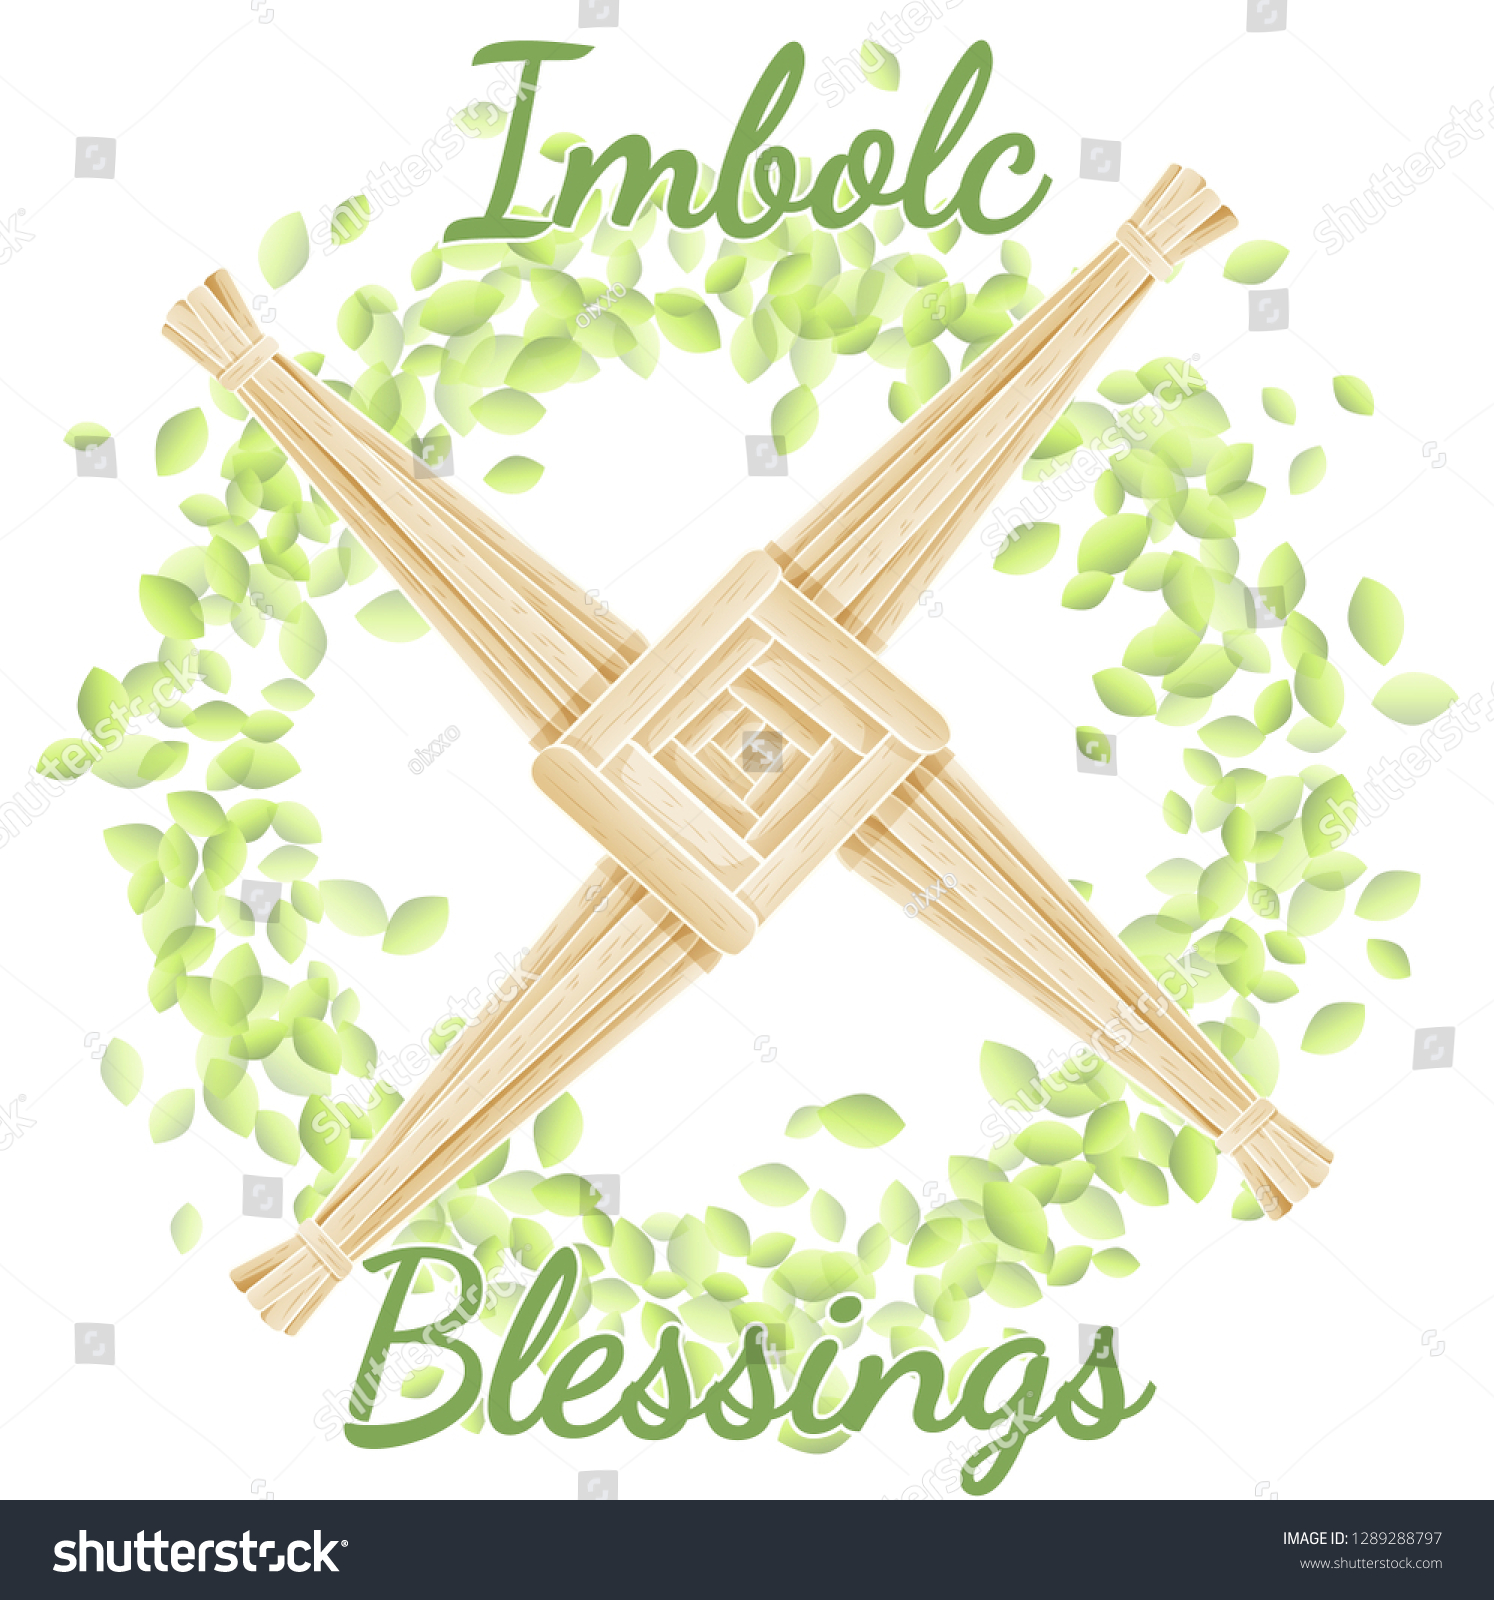 SVG of Imbolc Blessings. Beginning of spring pagan holiday. Brigid's Cross in a wreath of green leaves svg